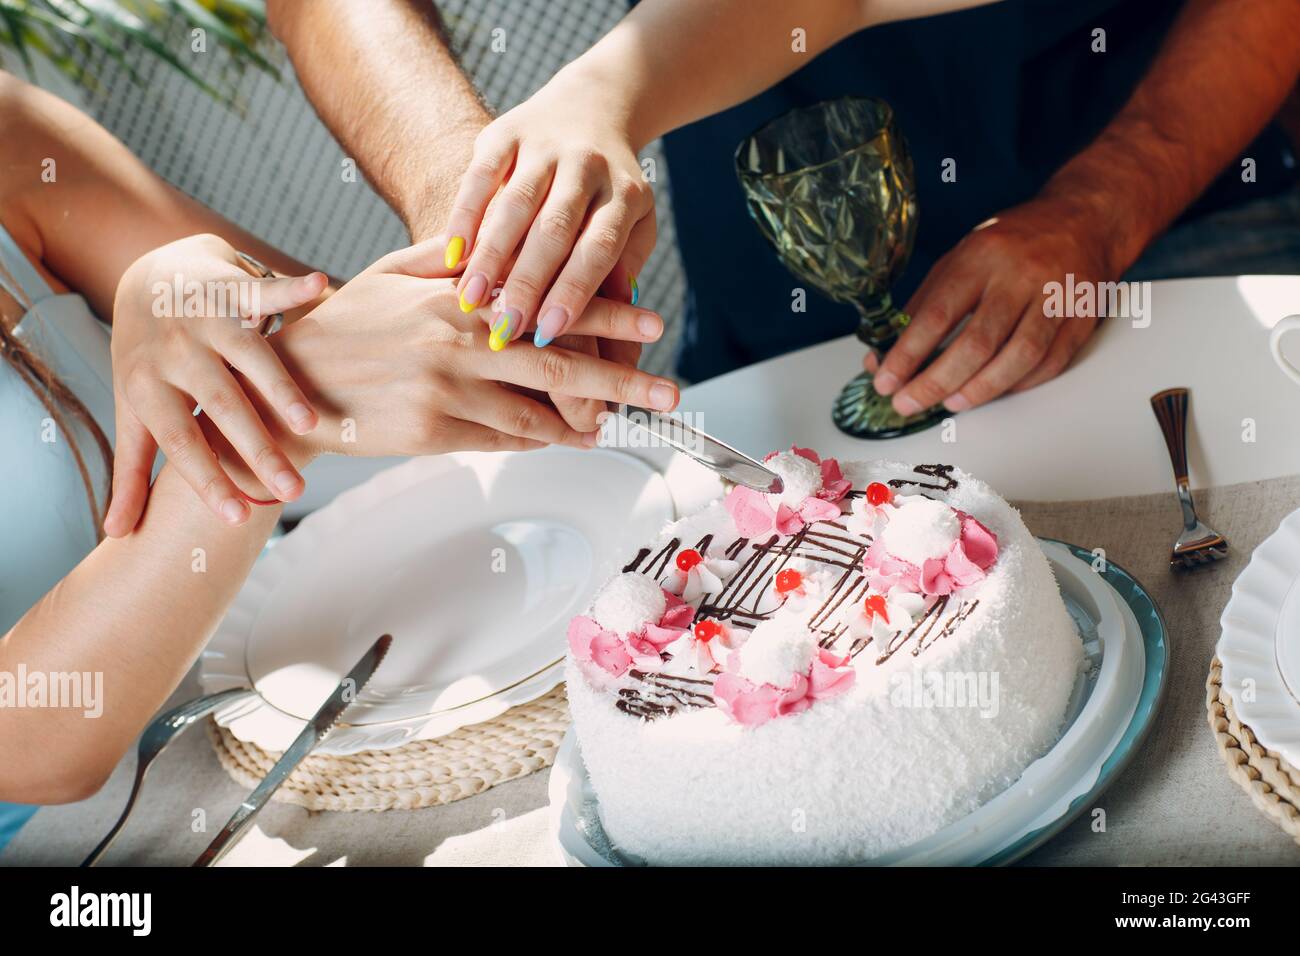 How to Cut Your Wedding Cake